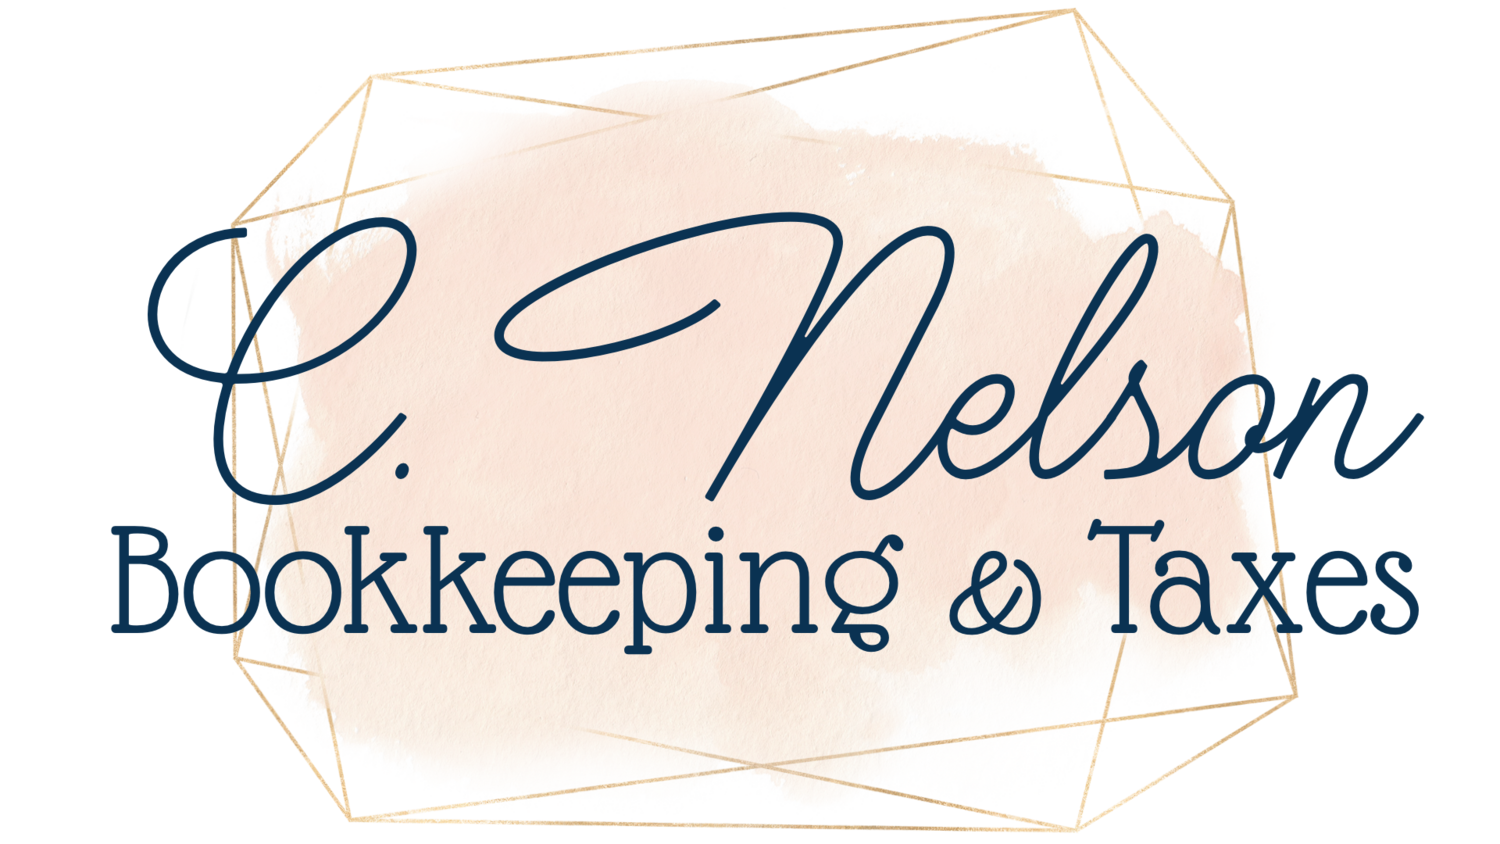 C. Nelson Bookkeeping & Taxes